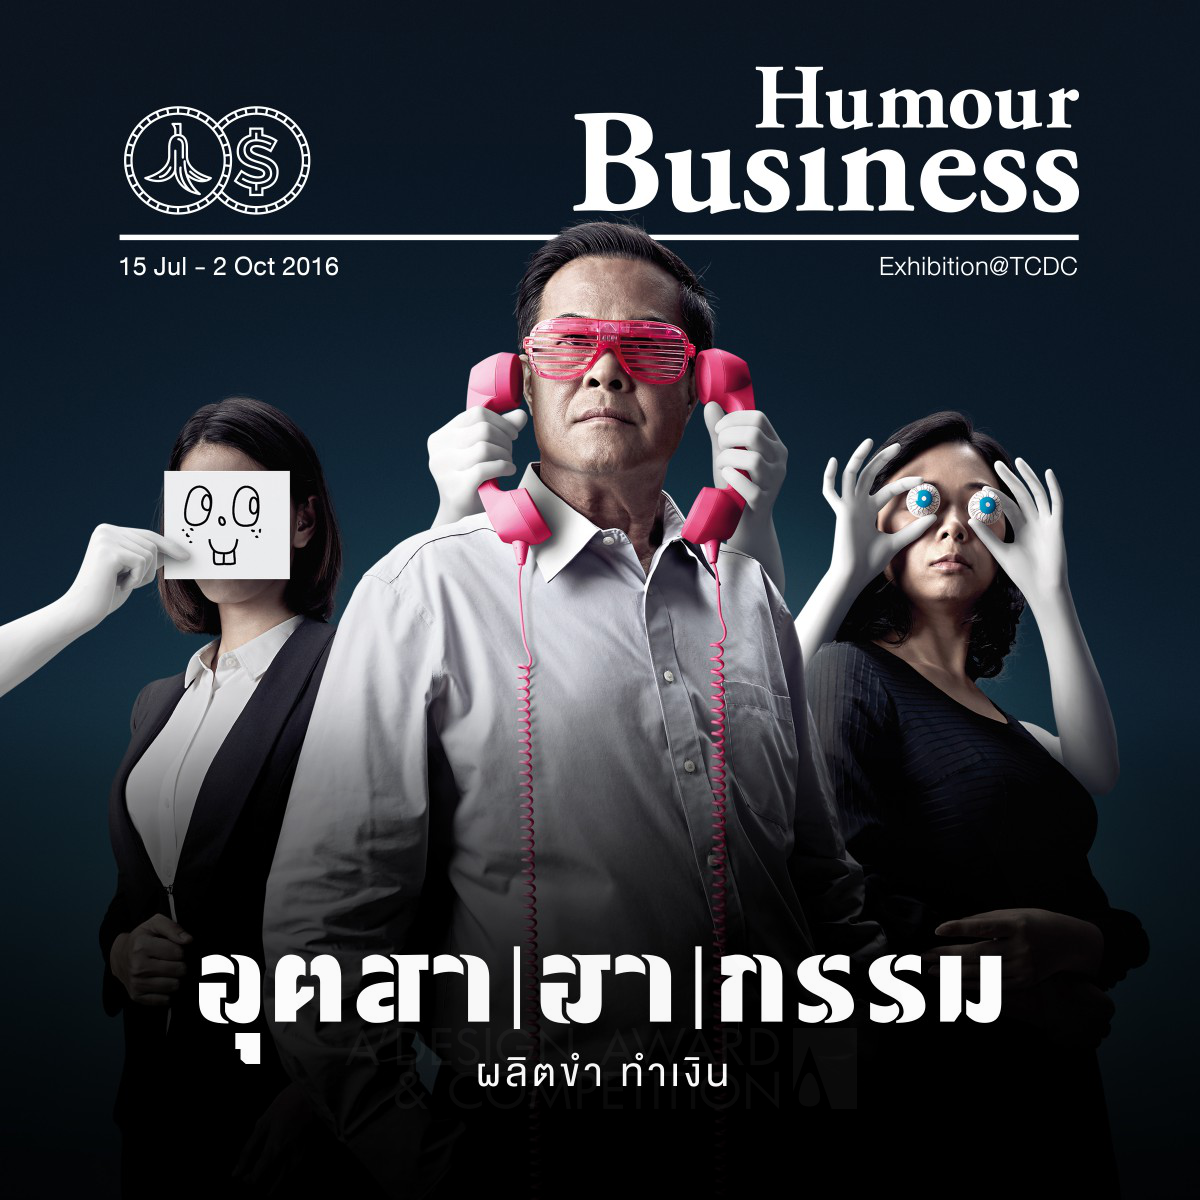 Humour Business